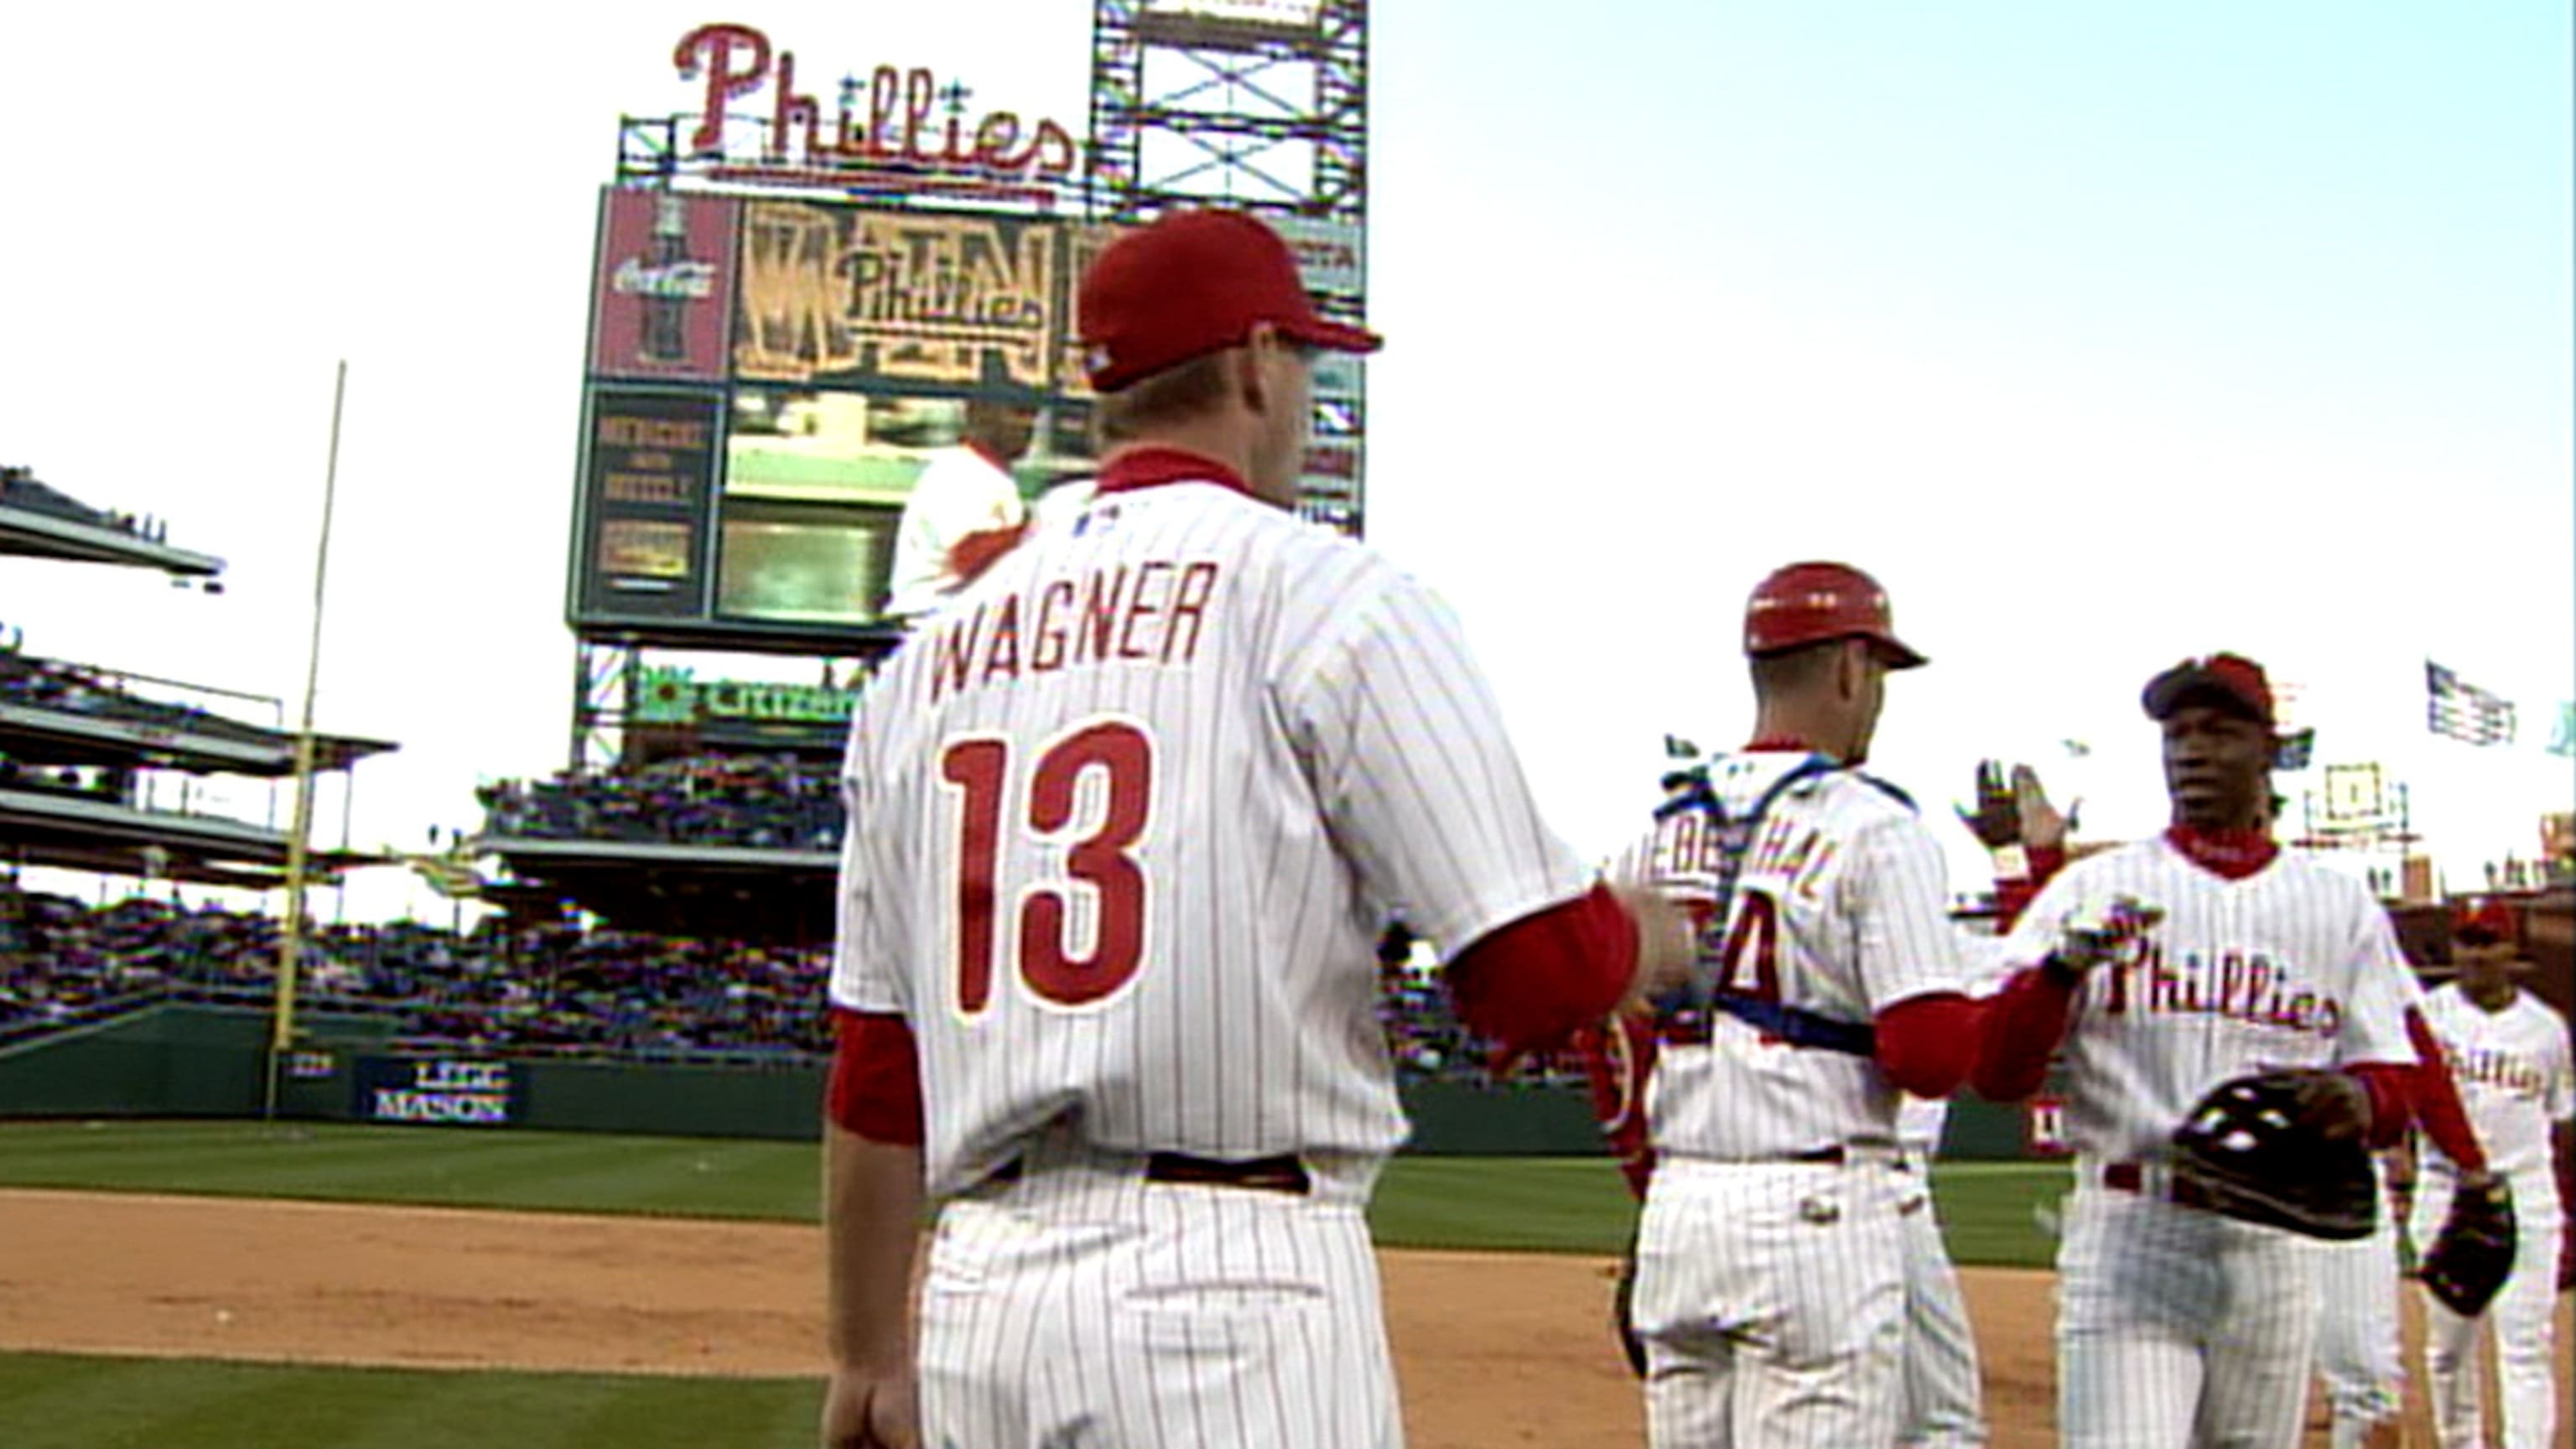 Billy Wagner on Hall of Fame: 'I was talked about as one of the